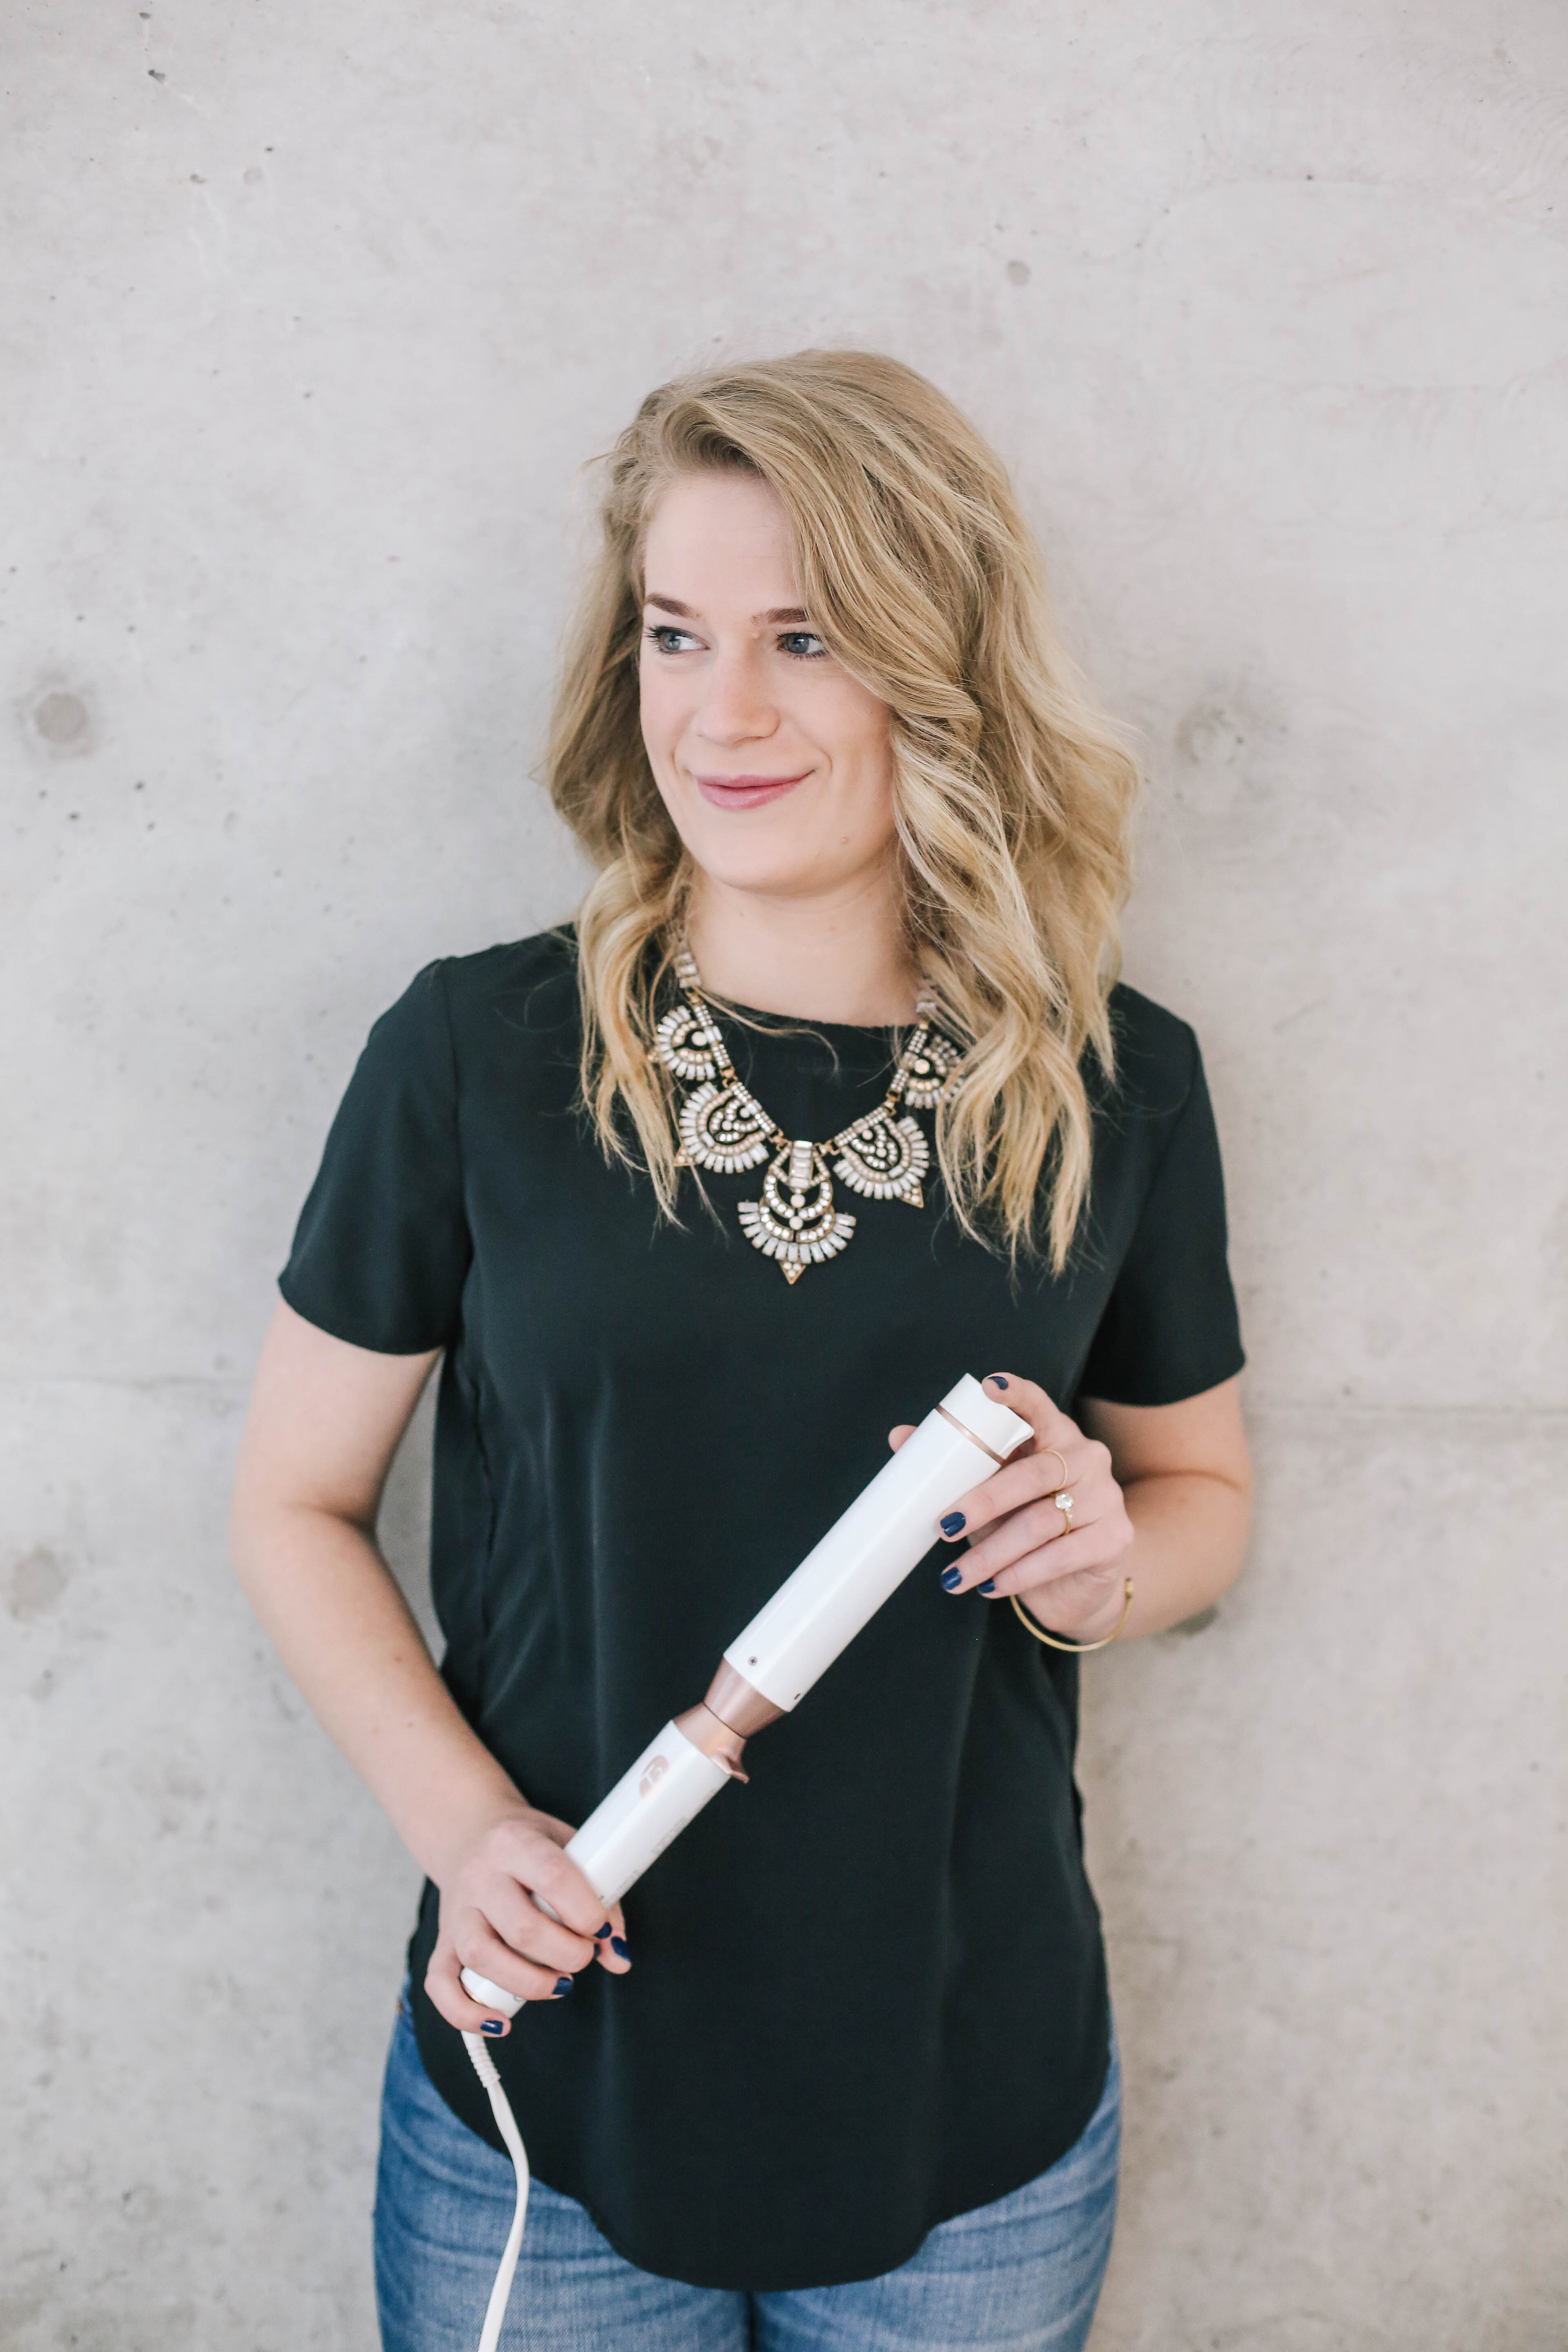 Easy Undone Curling Wand Waves.